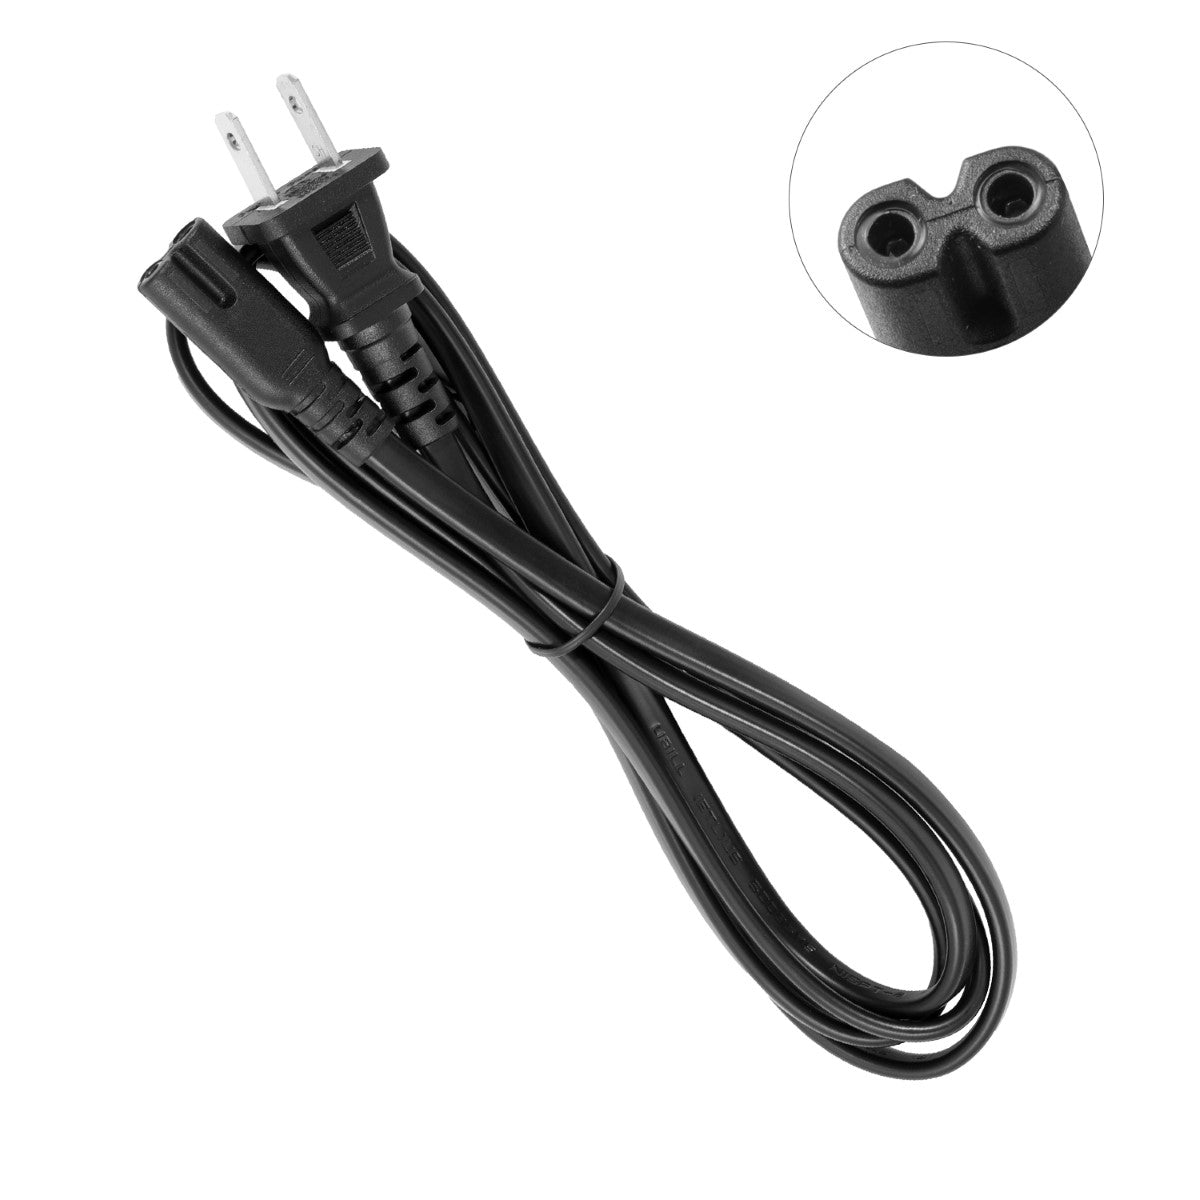 Power Cord for LG 43UH6100 43-inch 4K Smart TV.